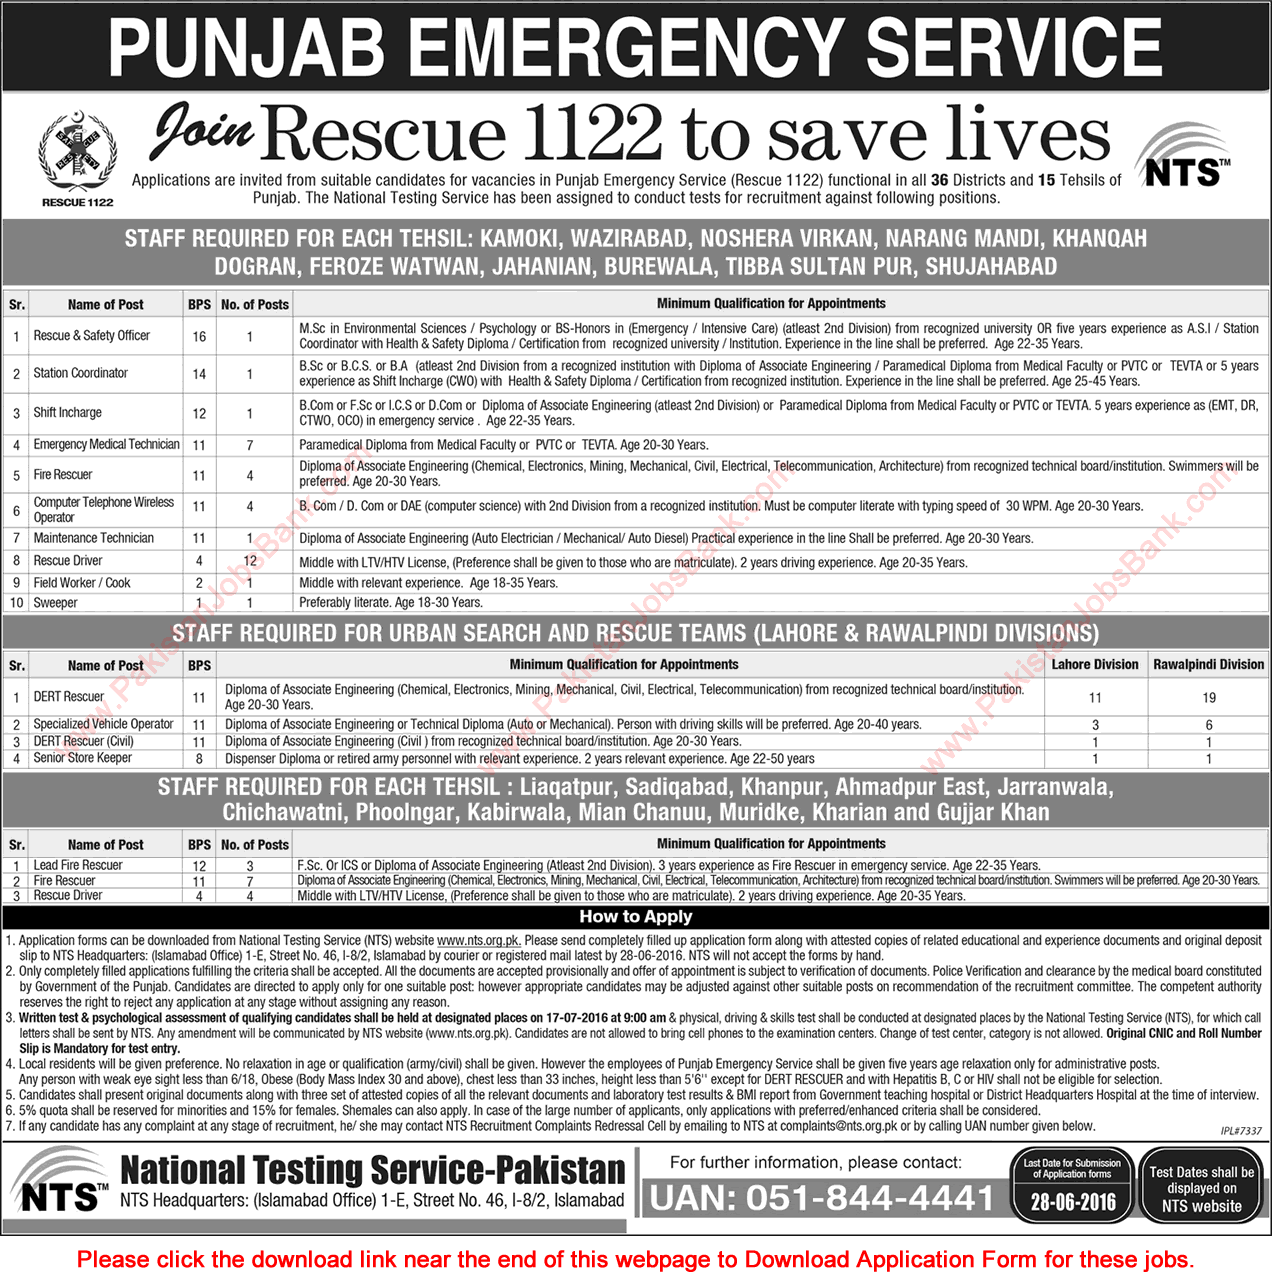 Punjab Emergency Service Rescue 1122 Jobs June 2016 NTS Application Form DERT / Fire Rescuers, Drivers & Others Latest